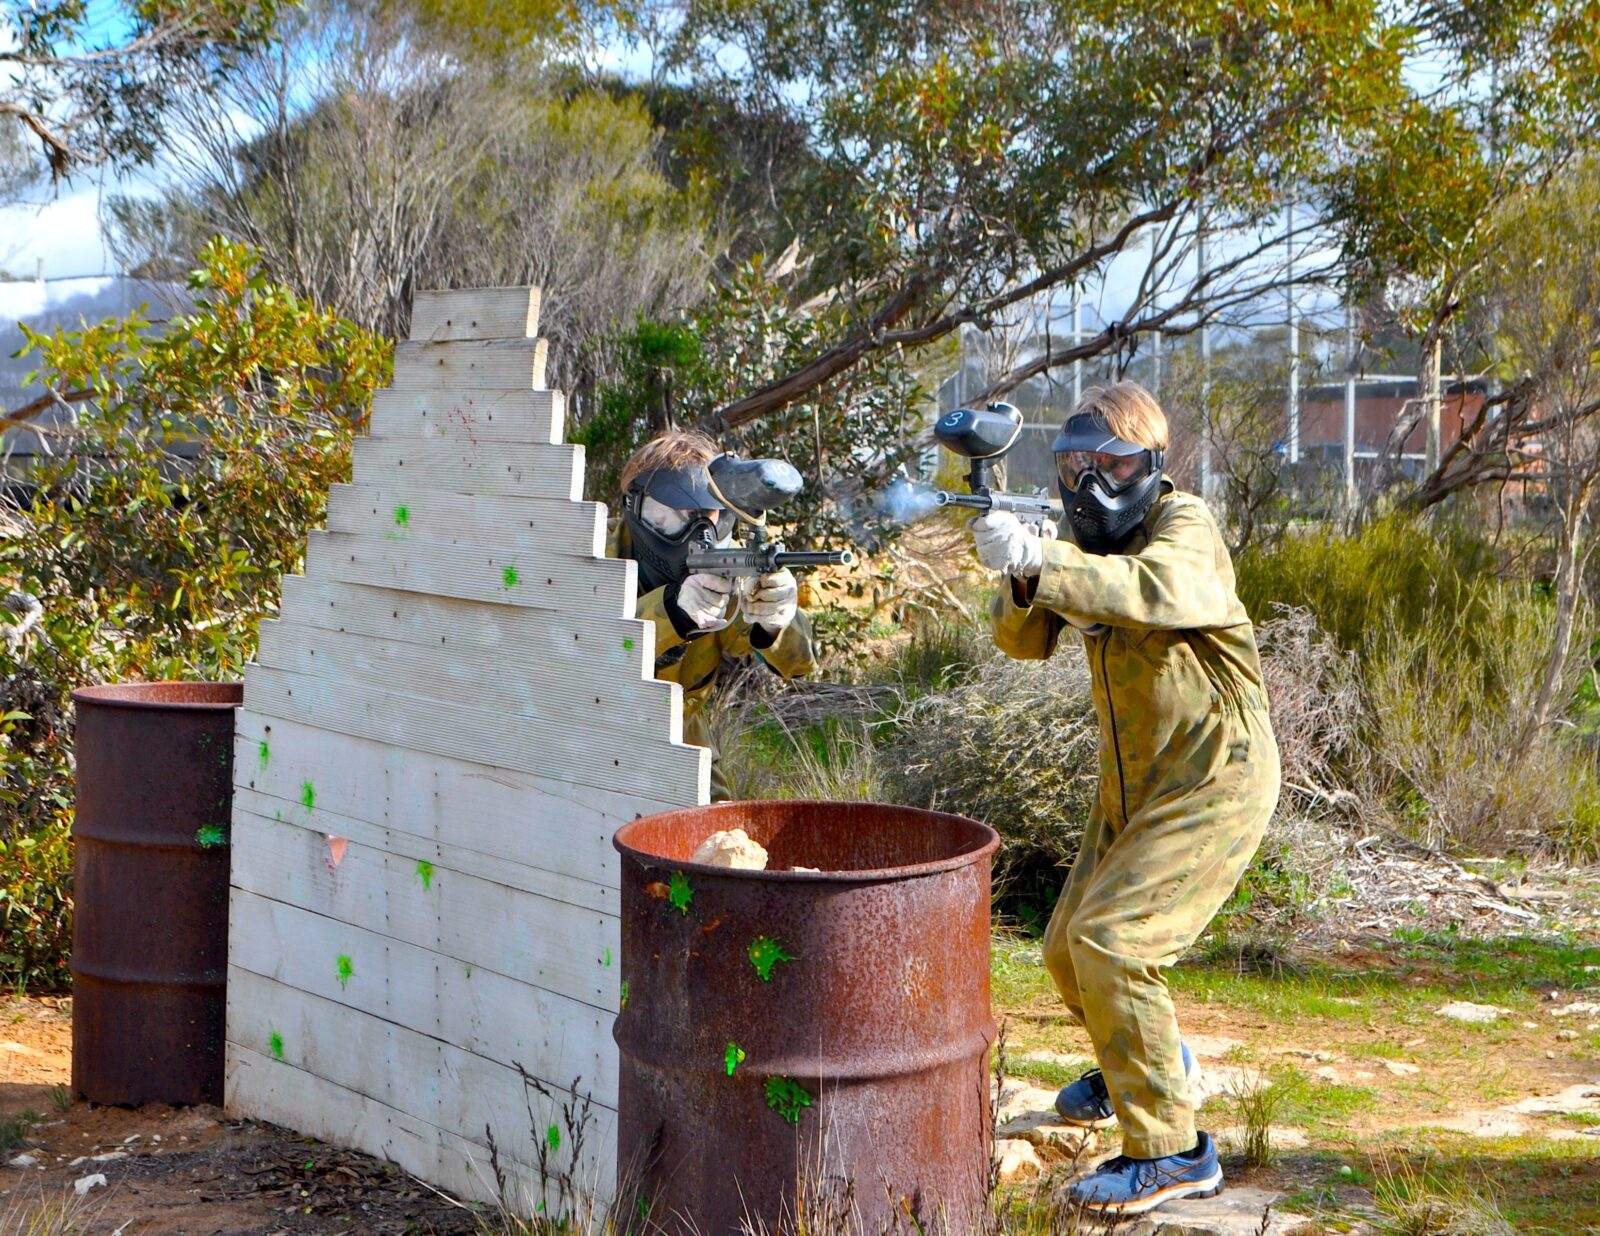 Action shot of two paintball players hiding behind a barricade in a rural bush setting.